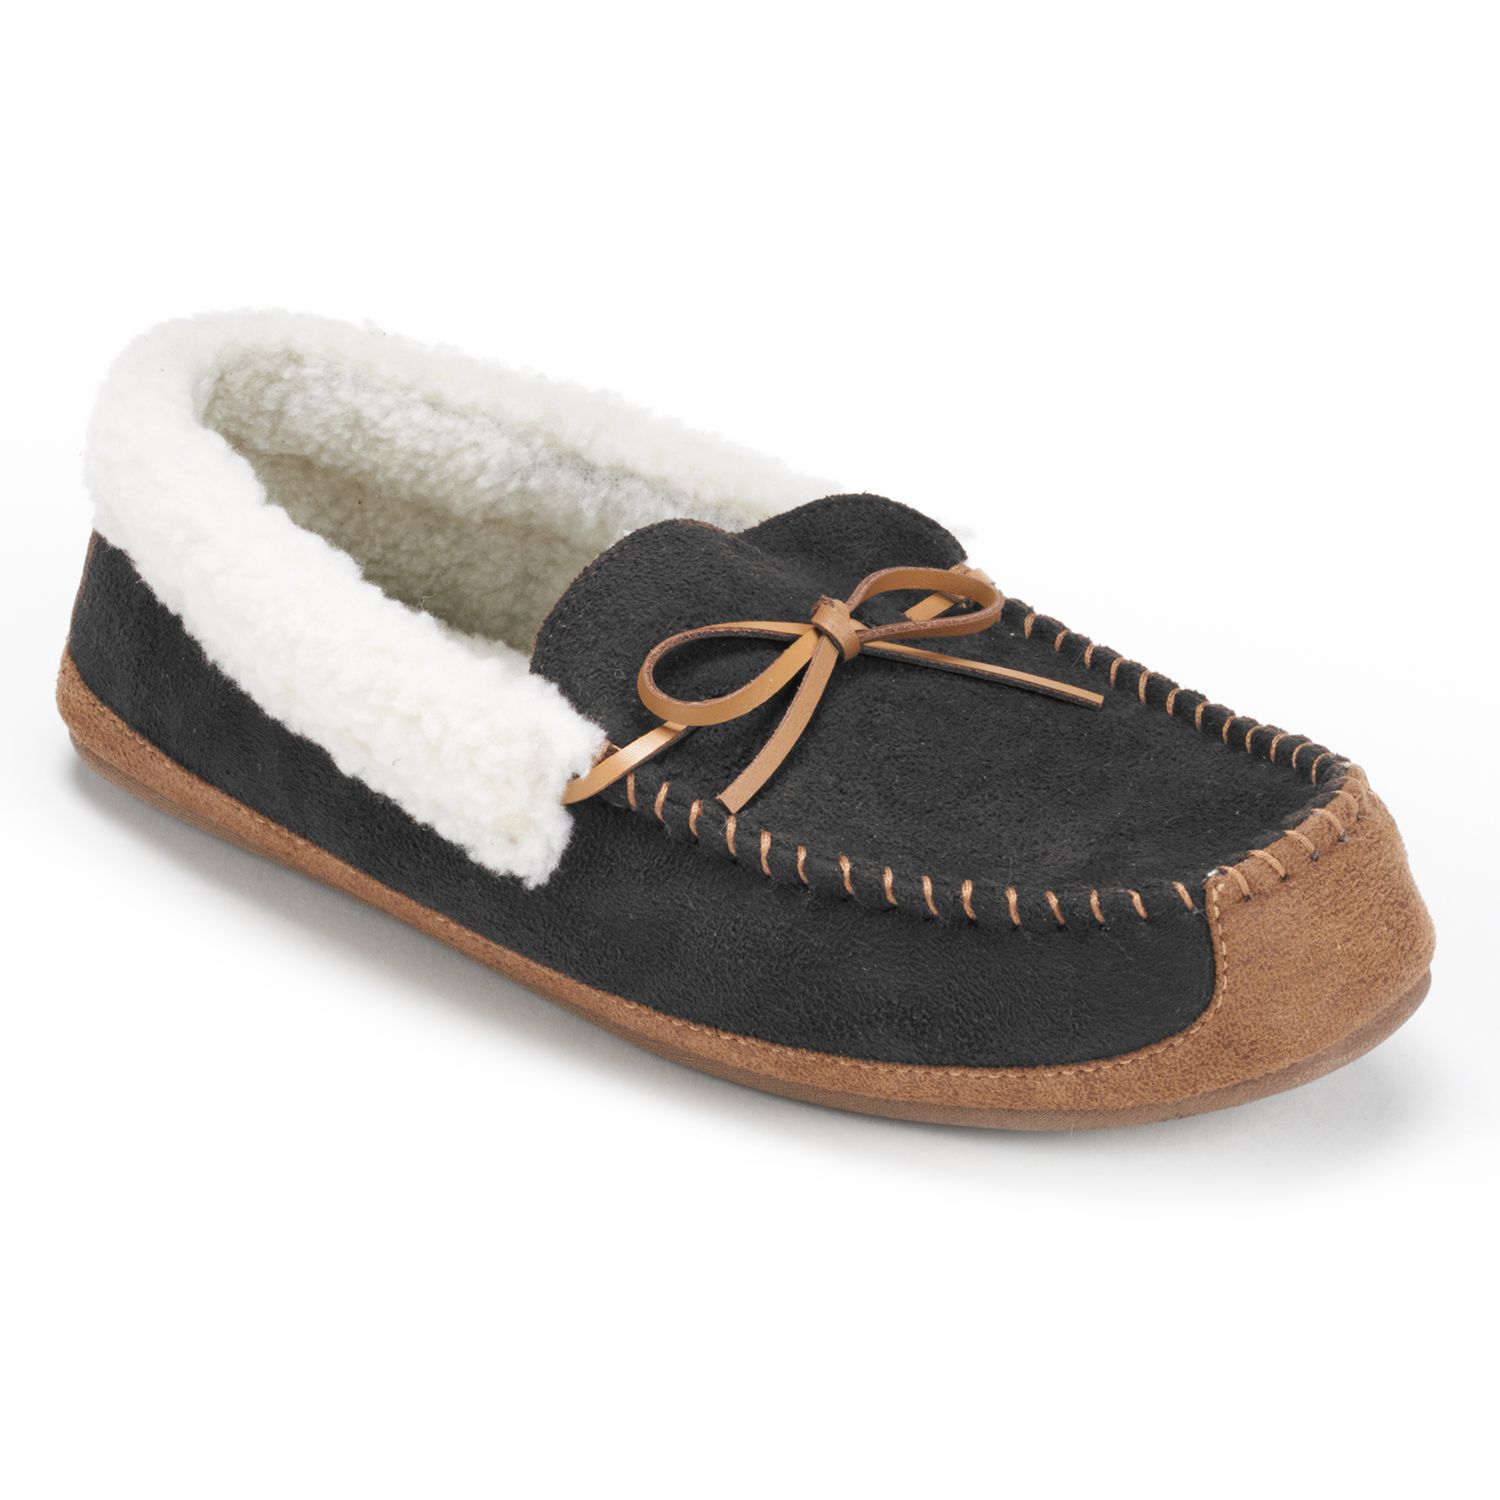 thinsulate slippers mens